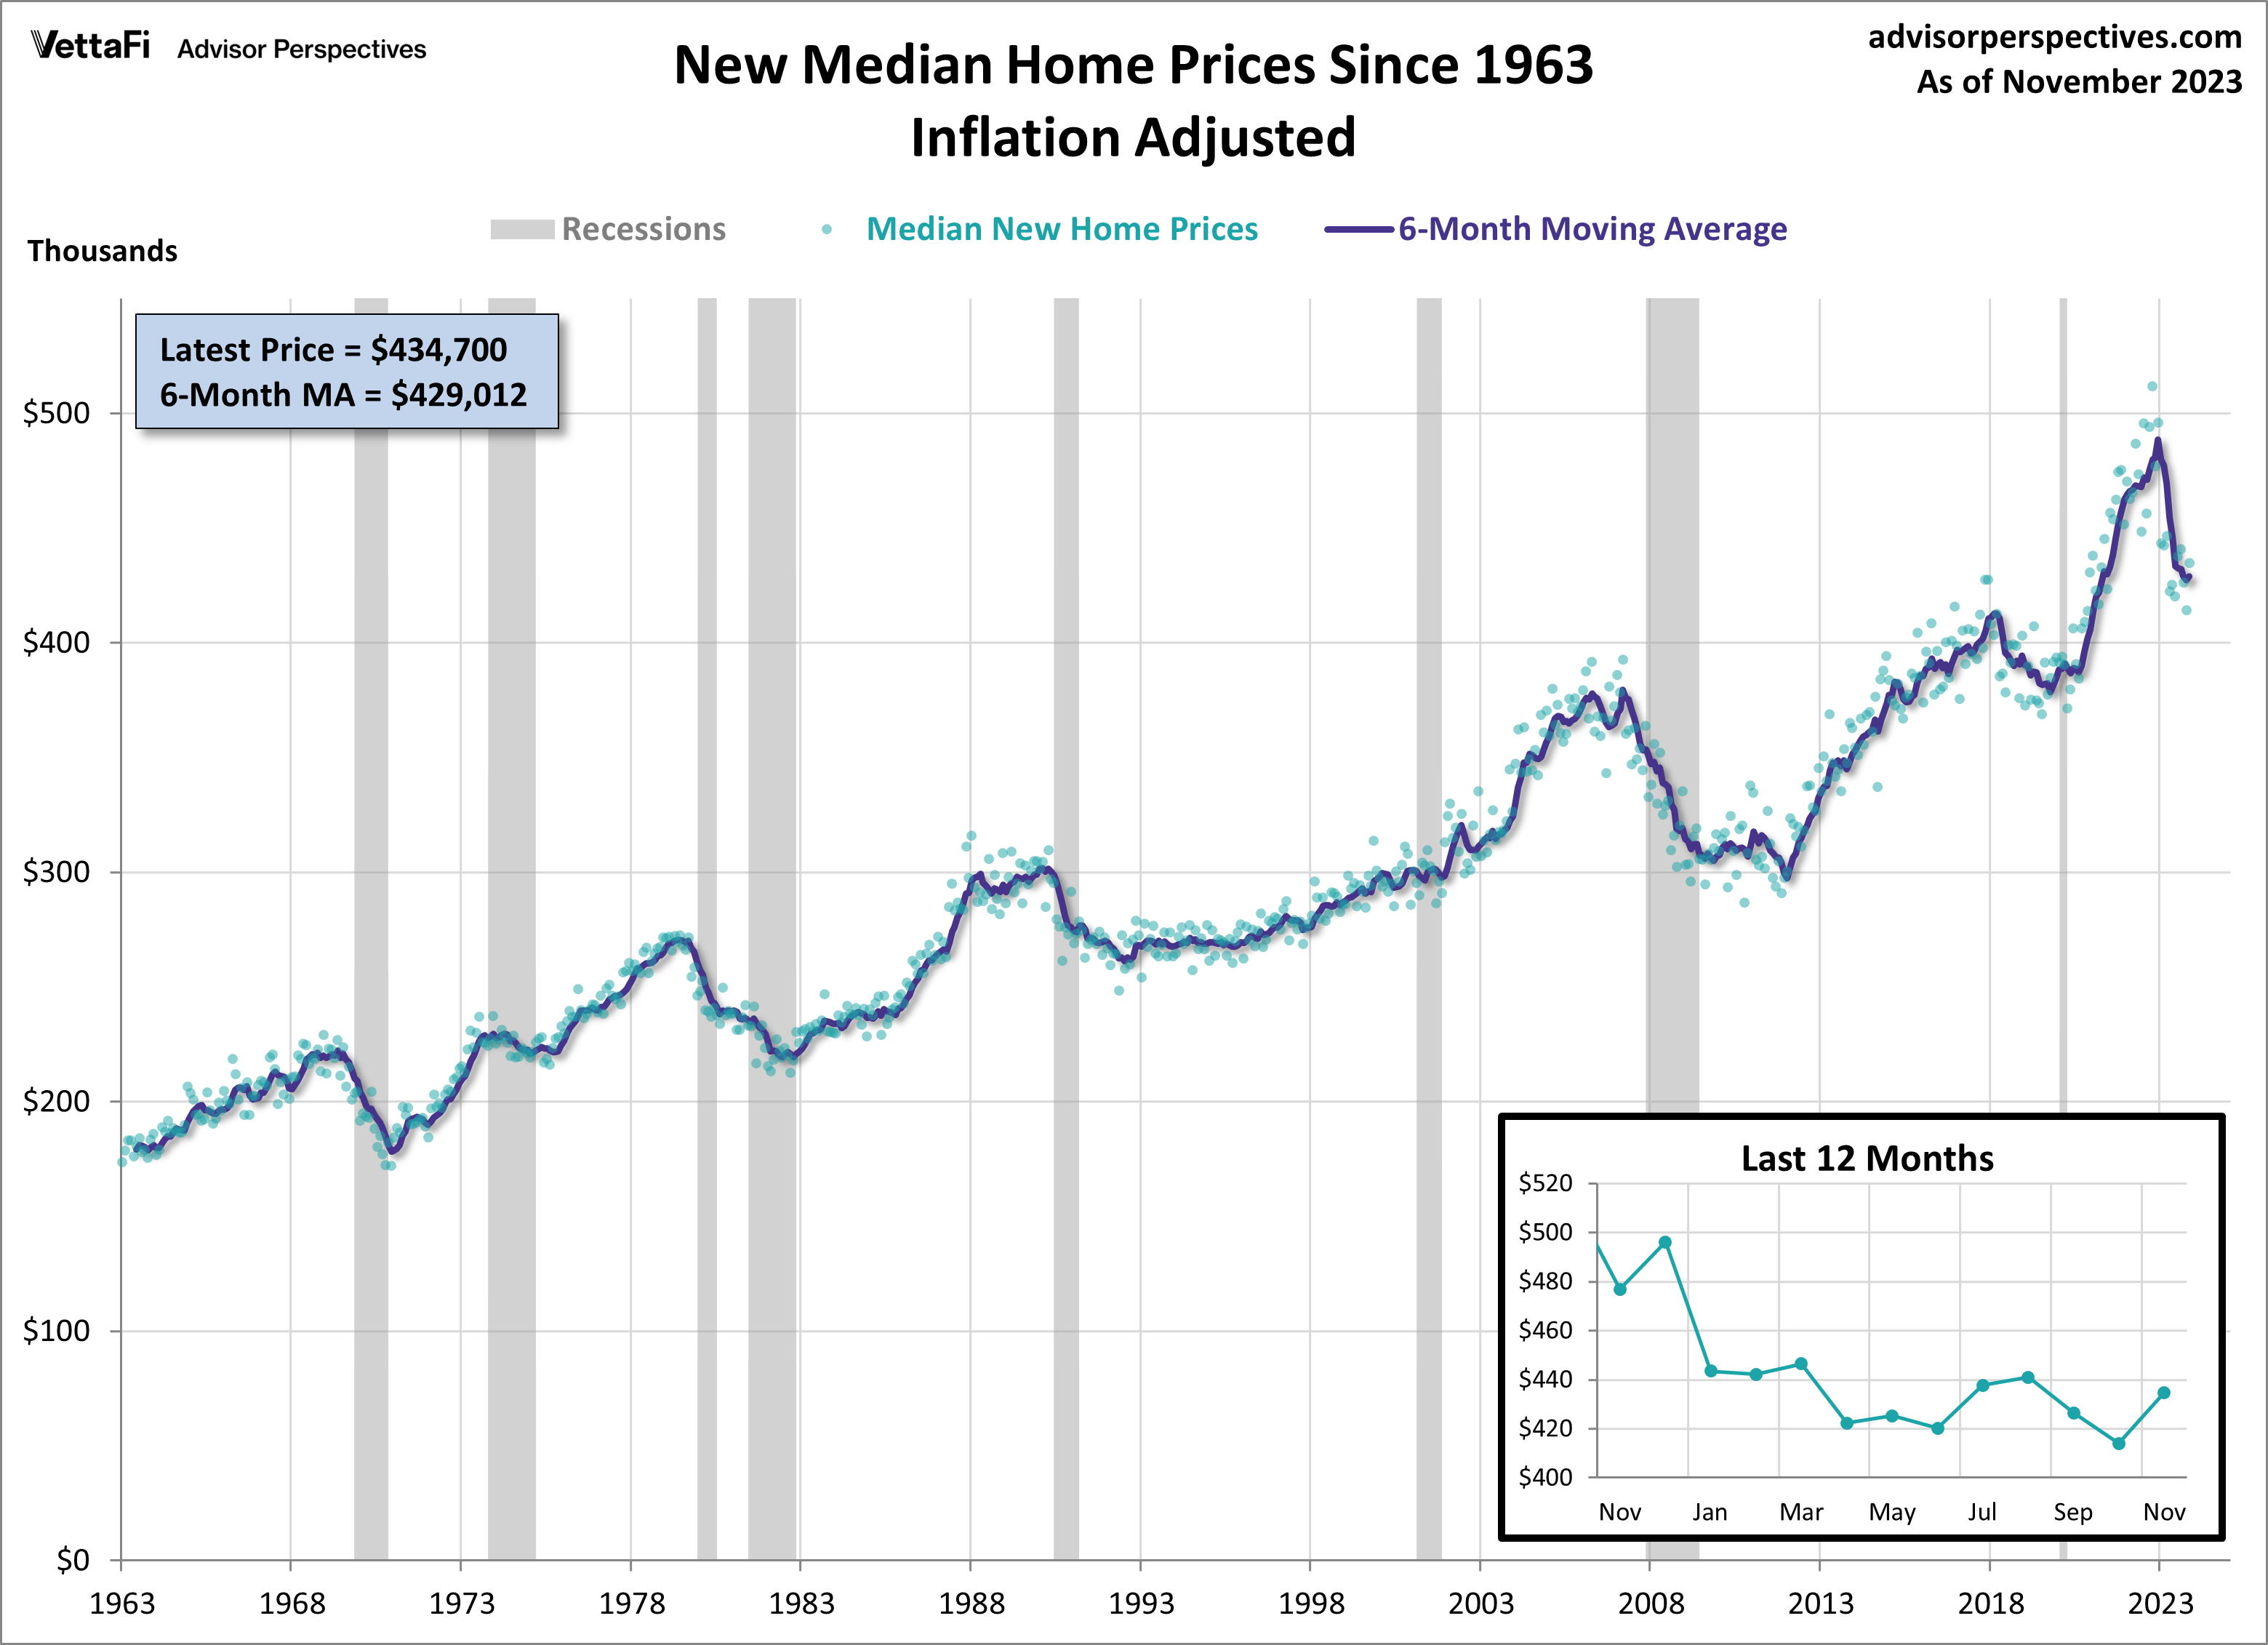 New Median Home Prices Since 1963